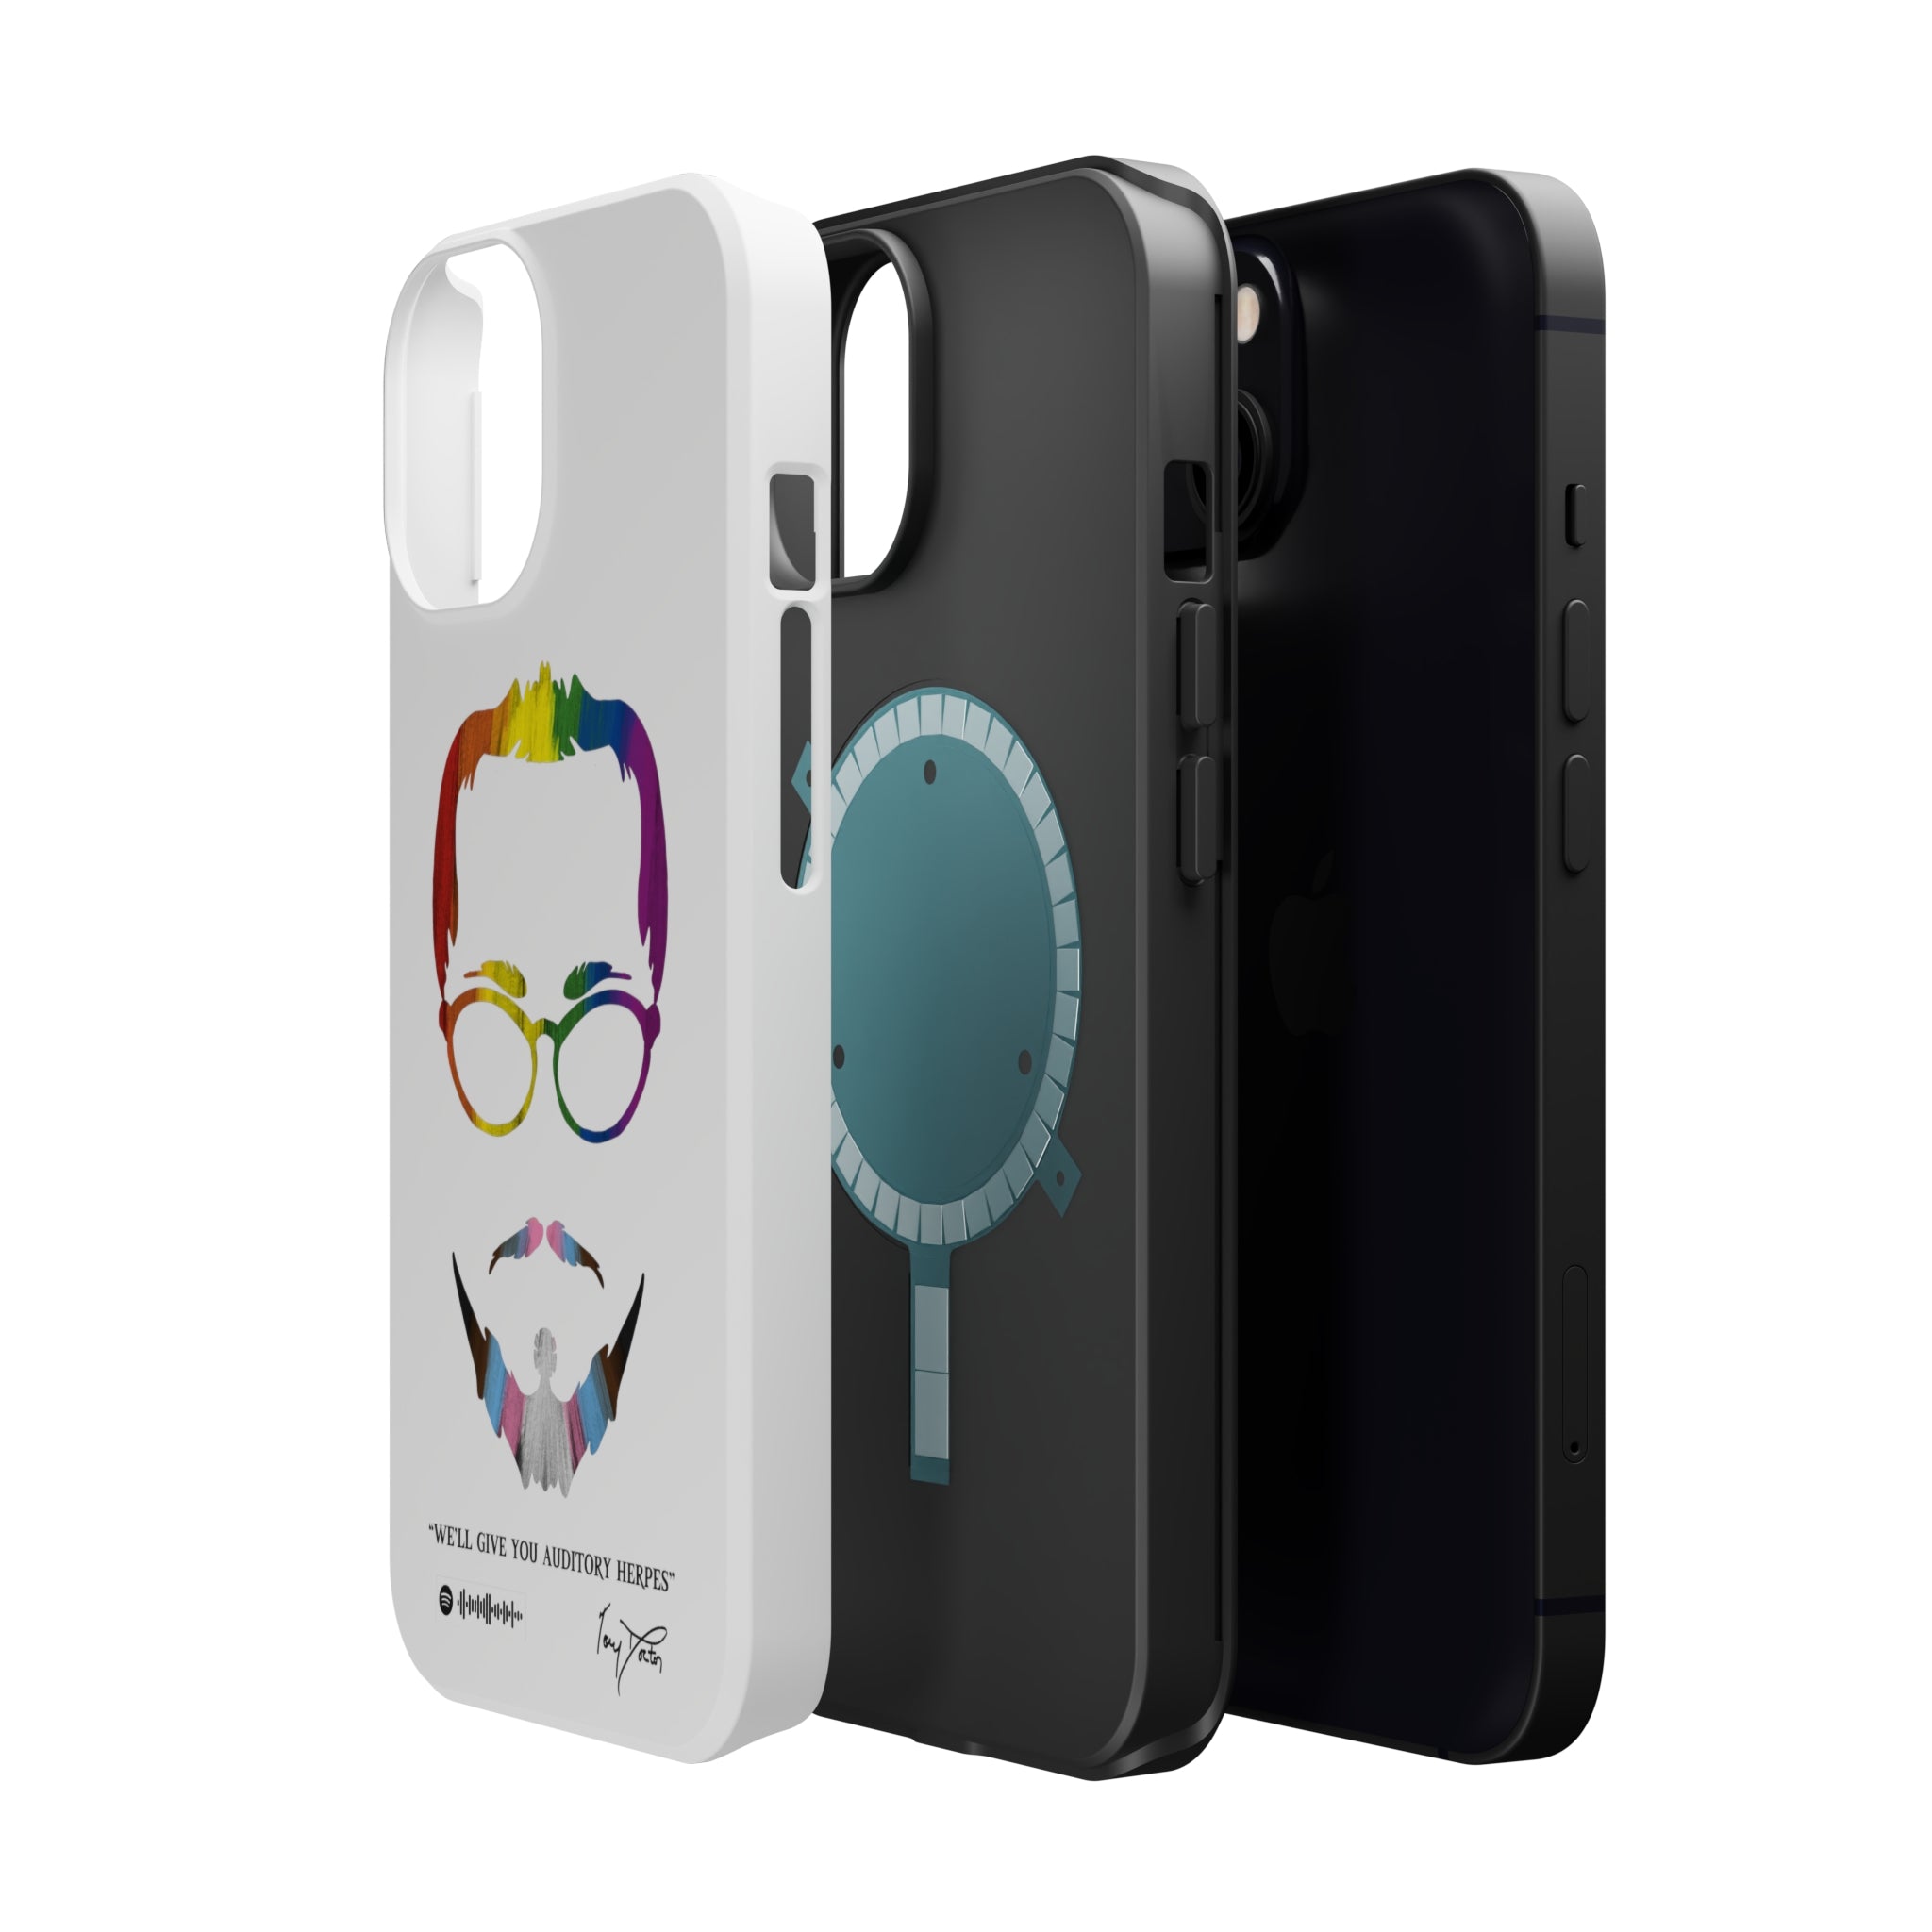 Tory Doctor's "Auditory Herpes" MagSafe Tough iPhone Case - LGBTQIA+ (White Background)